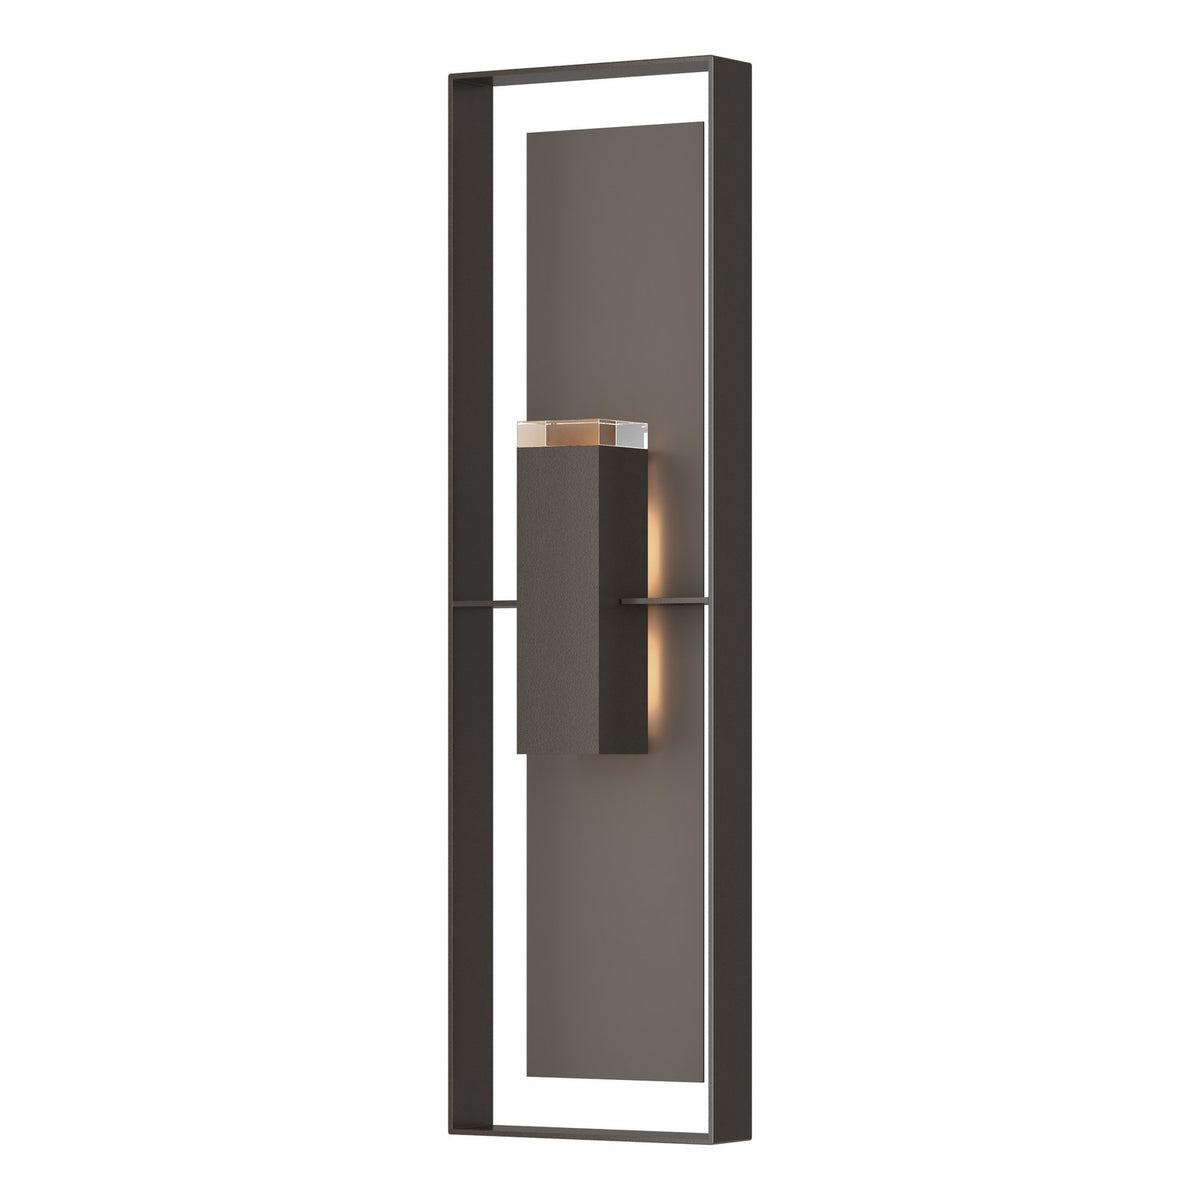 Hubbardton Forge - 302608-SKT-14-77-ZM0736 - Two Light Outdoor Wall Sconce - Shadow Box - Coastal Oil Rubbed Bronze